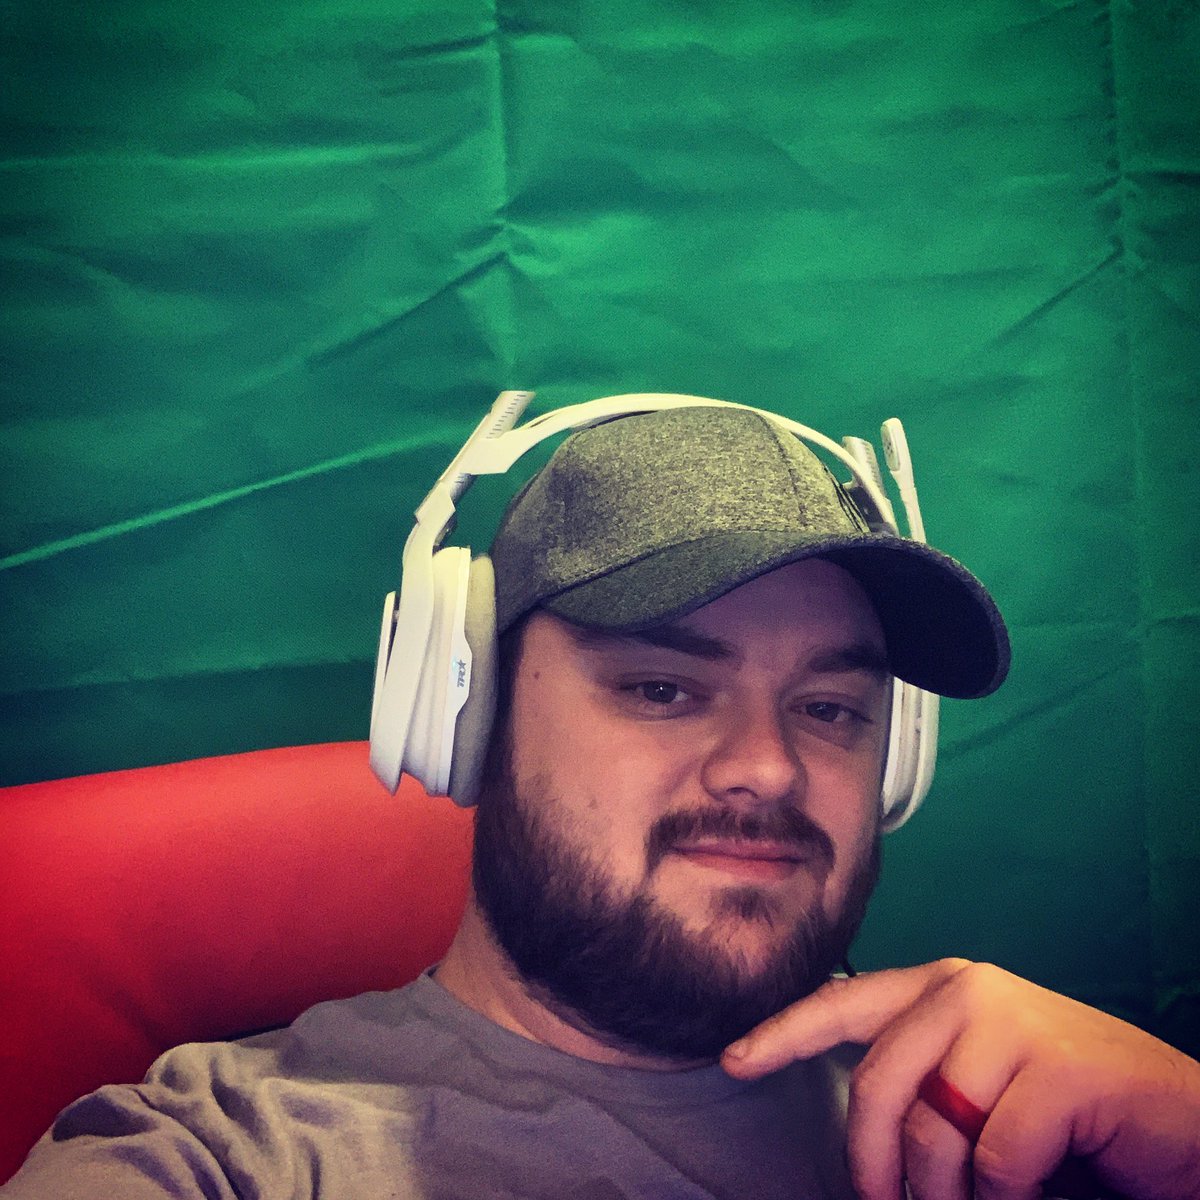 Should I stream tonight? Who would be up to show some love? #mixerstreamer #CallofDutyBlackOps4 #blackout #greatstream #besteditor #watchmewin